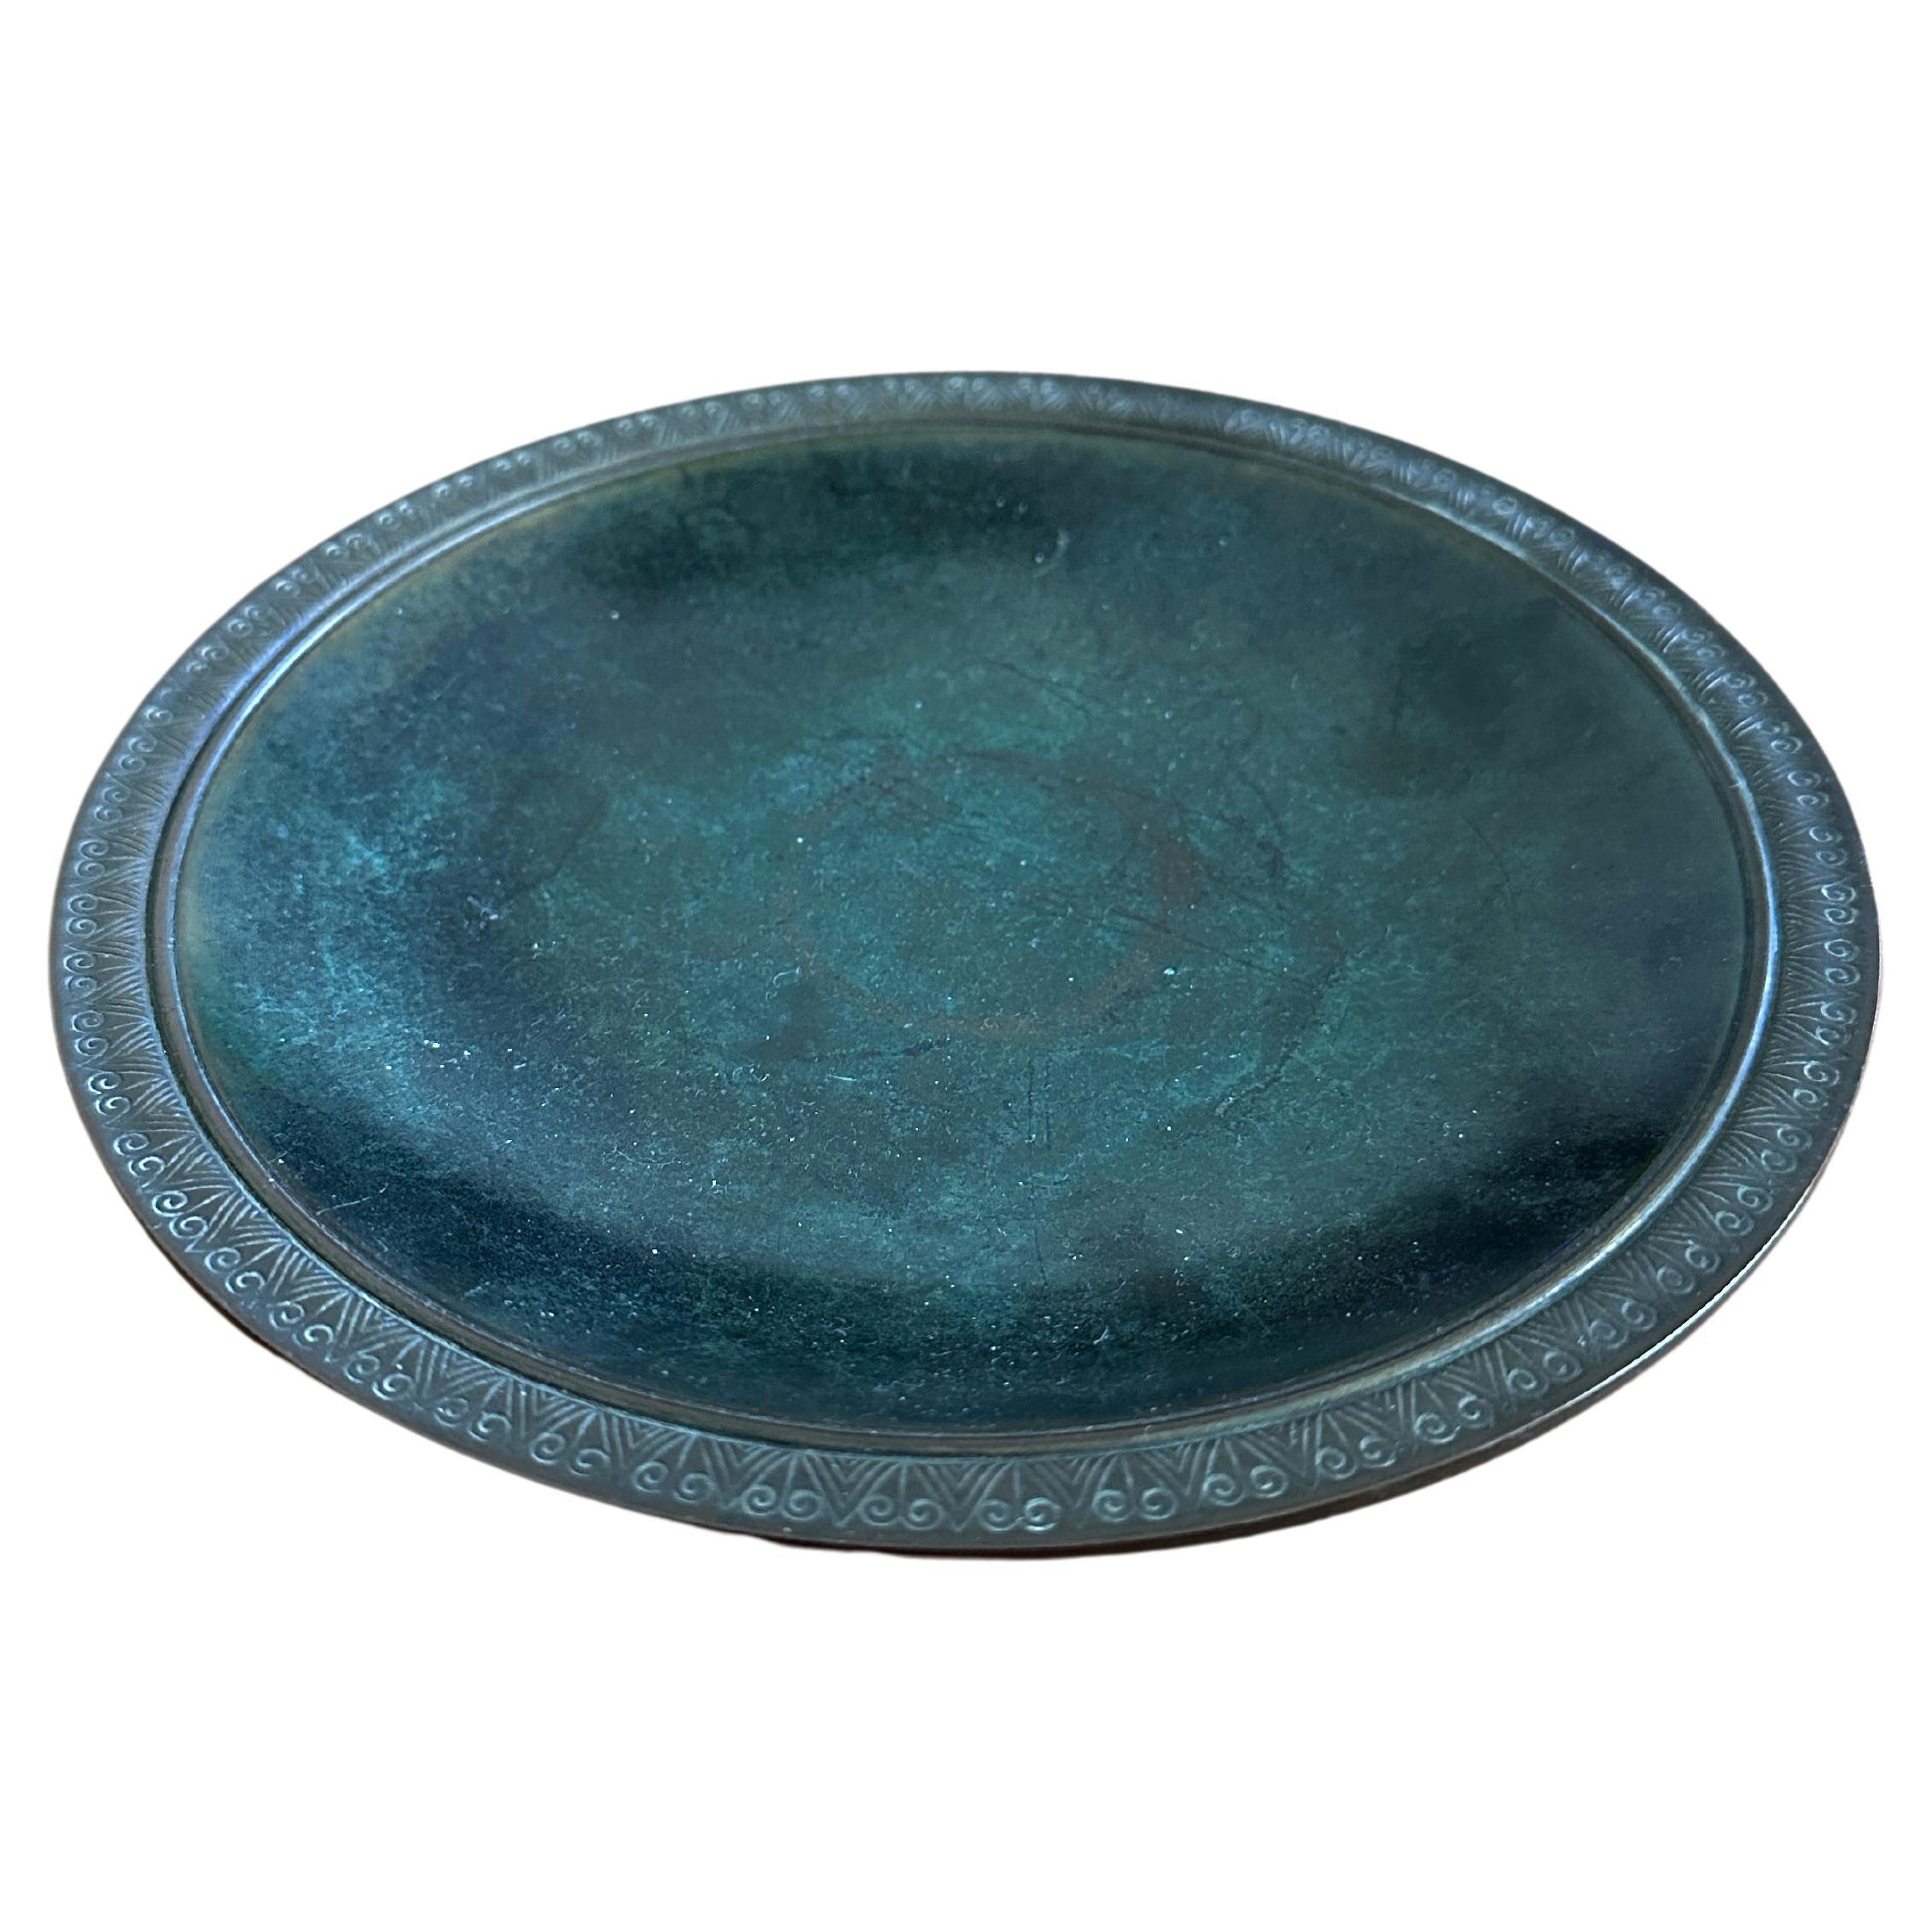 Vintage Patinated Bronze Shallow Bowl by Just Andersen